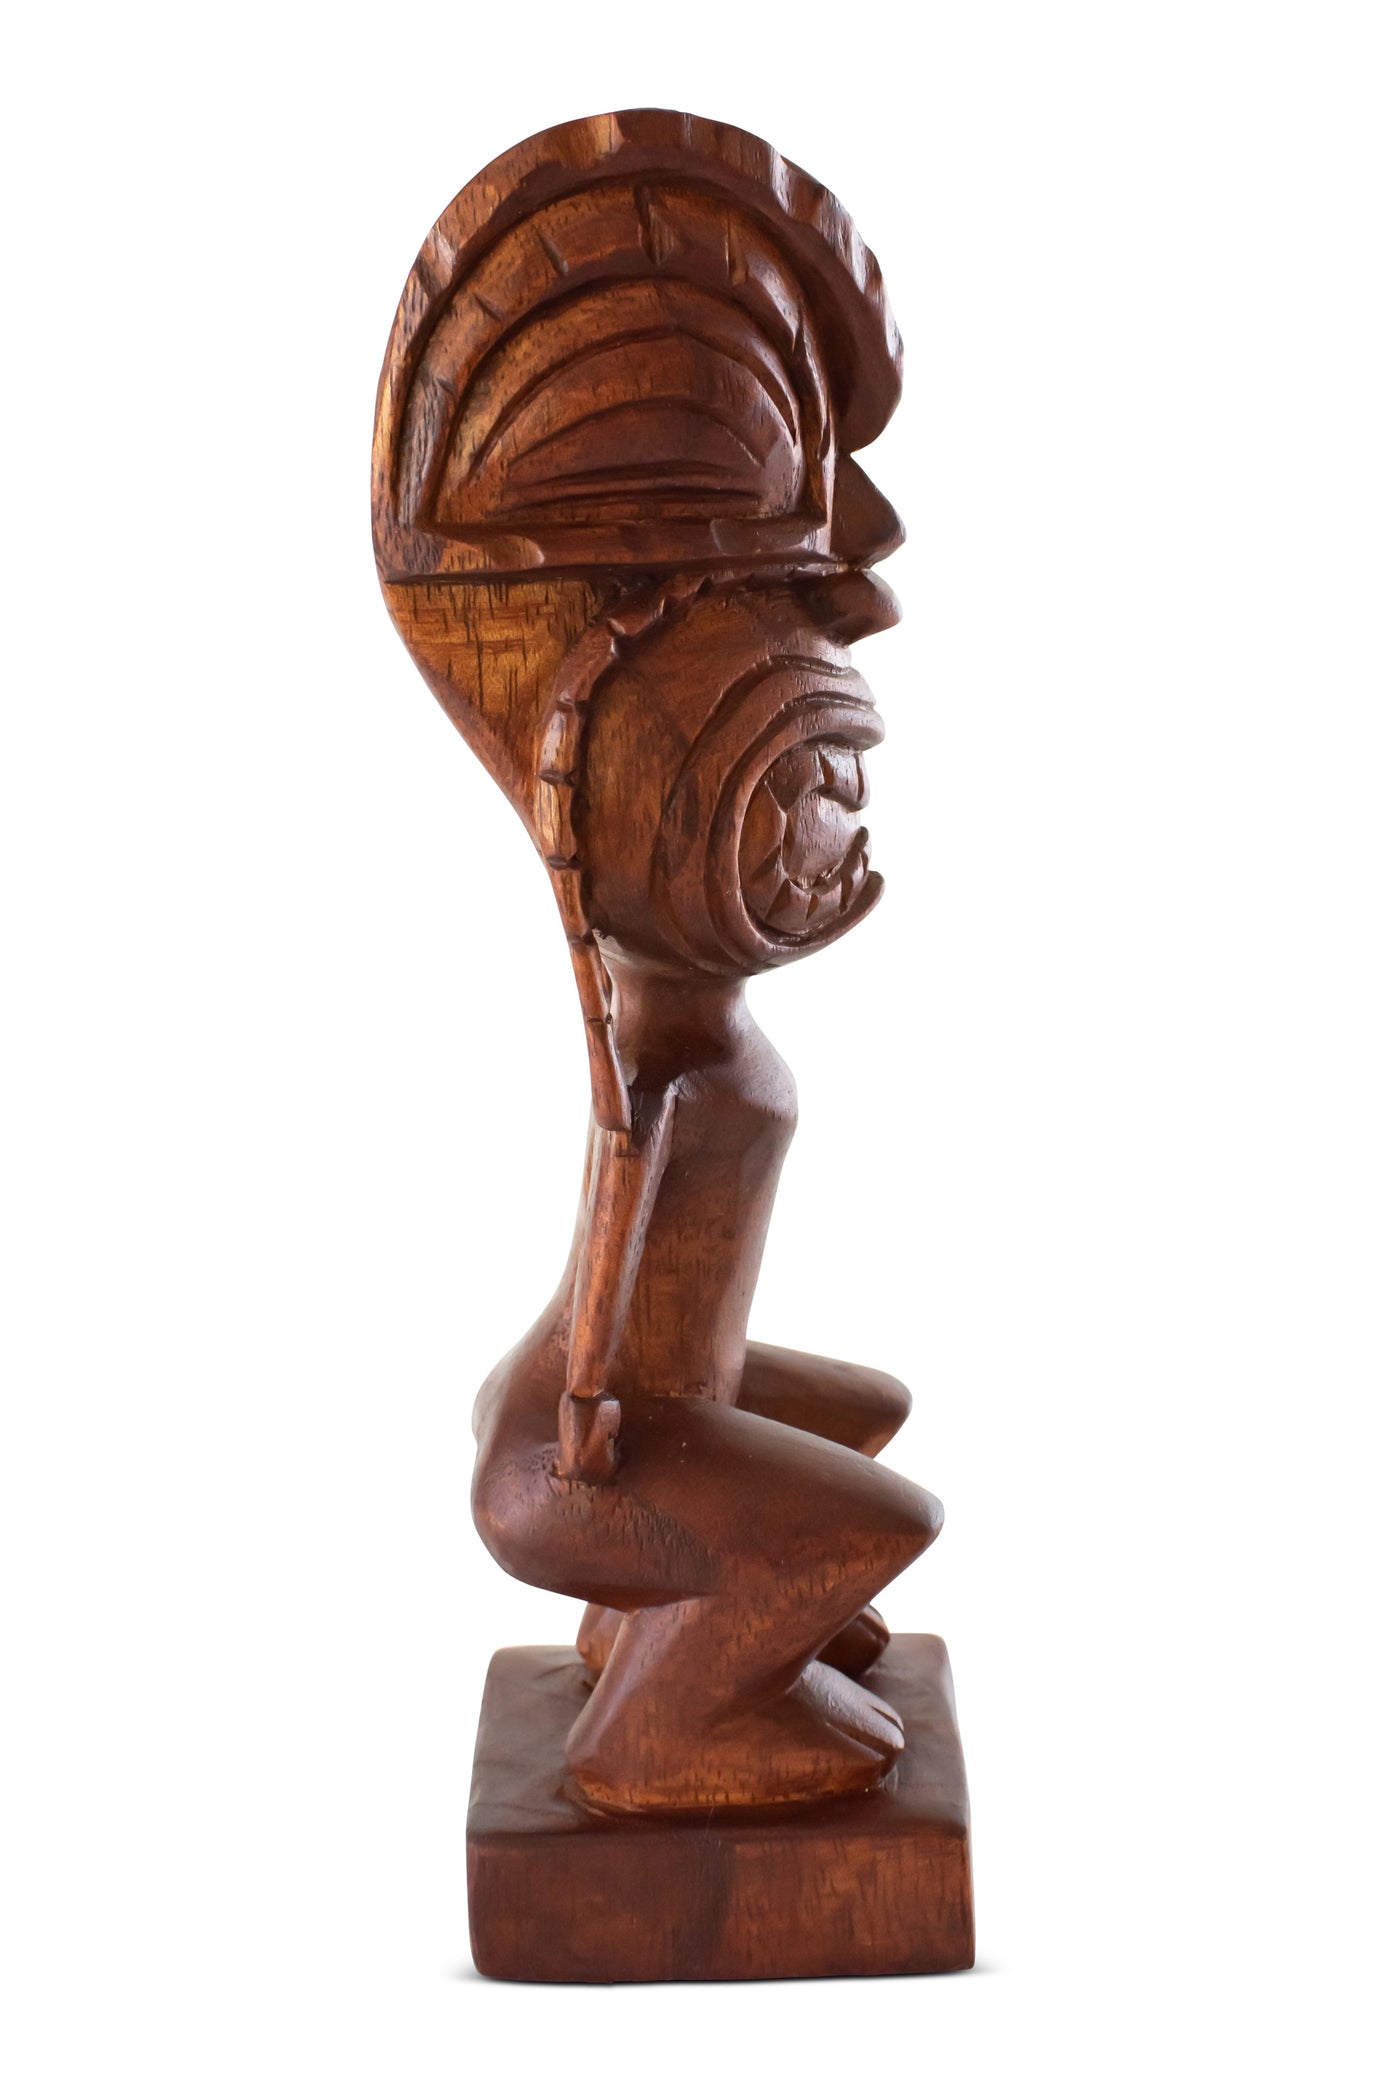 Handmade Wooden Primitive Angry Face Tribal Statue Sculpture Tiki Bar Handcrafted Unique Gift Art Home Decor Accent Figurine Artwork Hand Carved